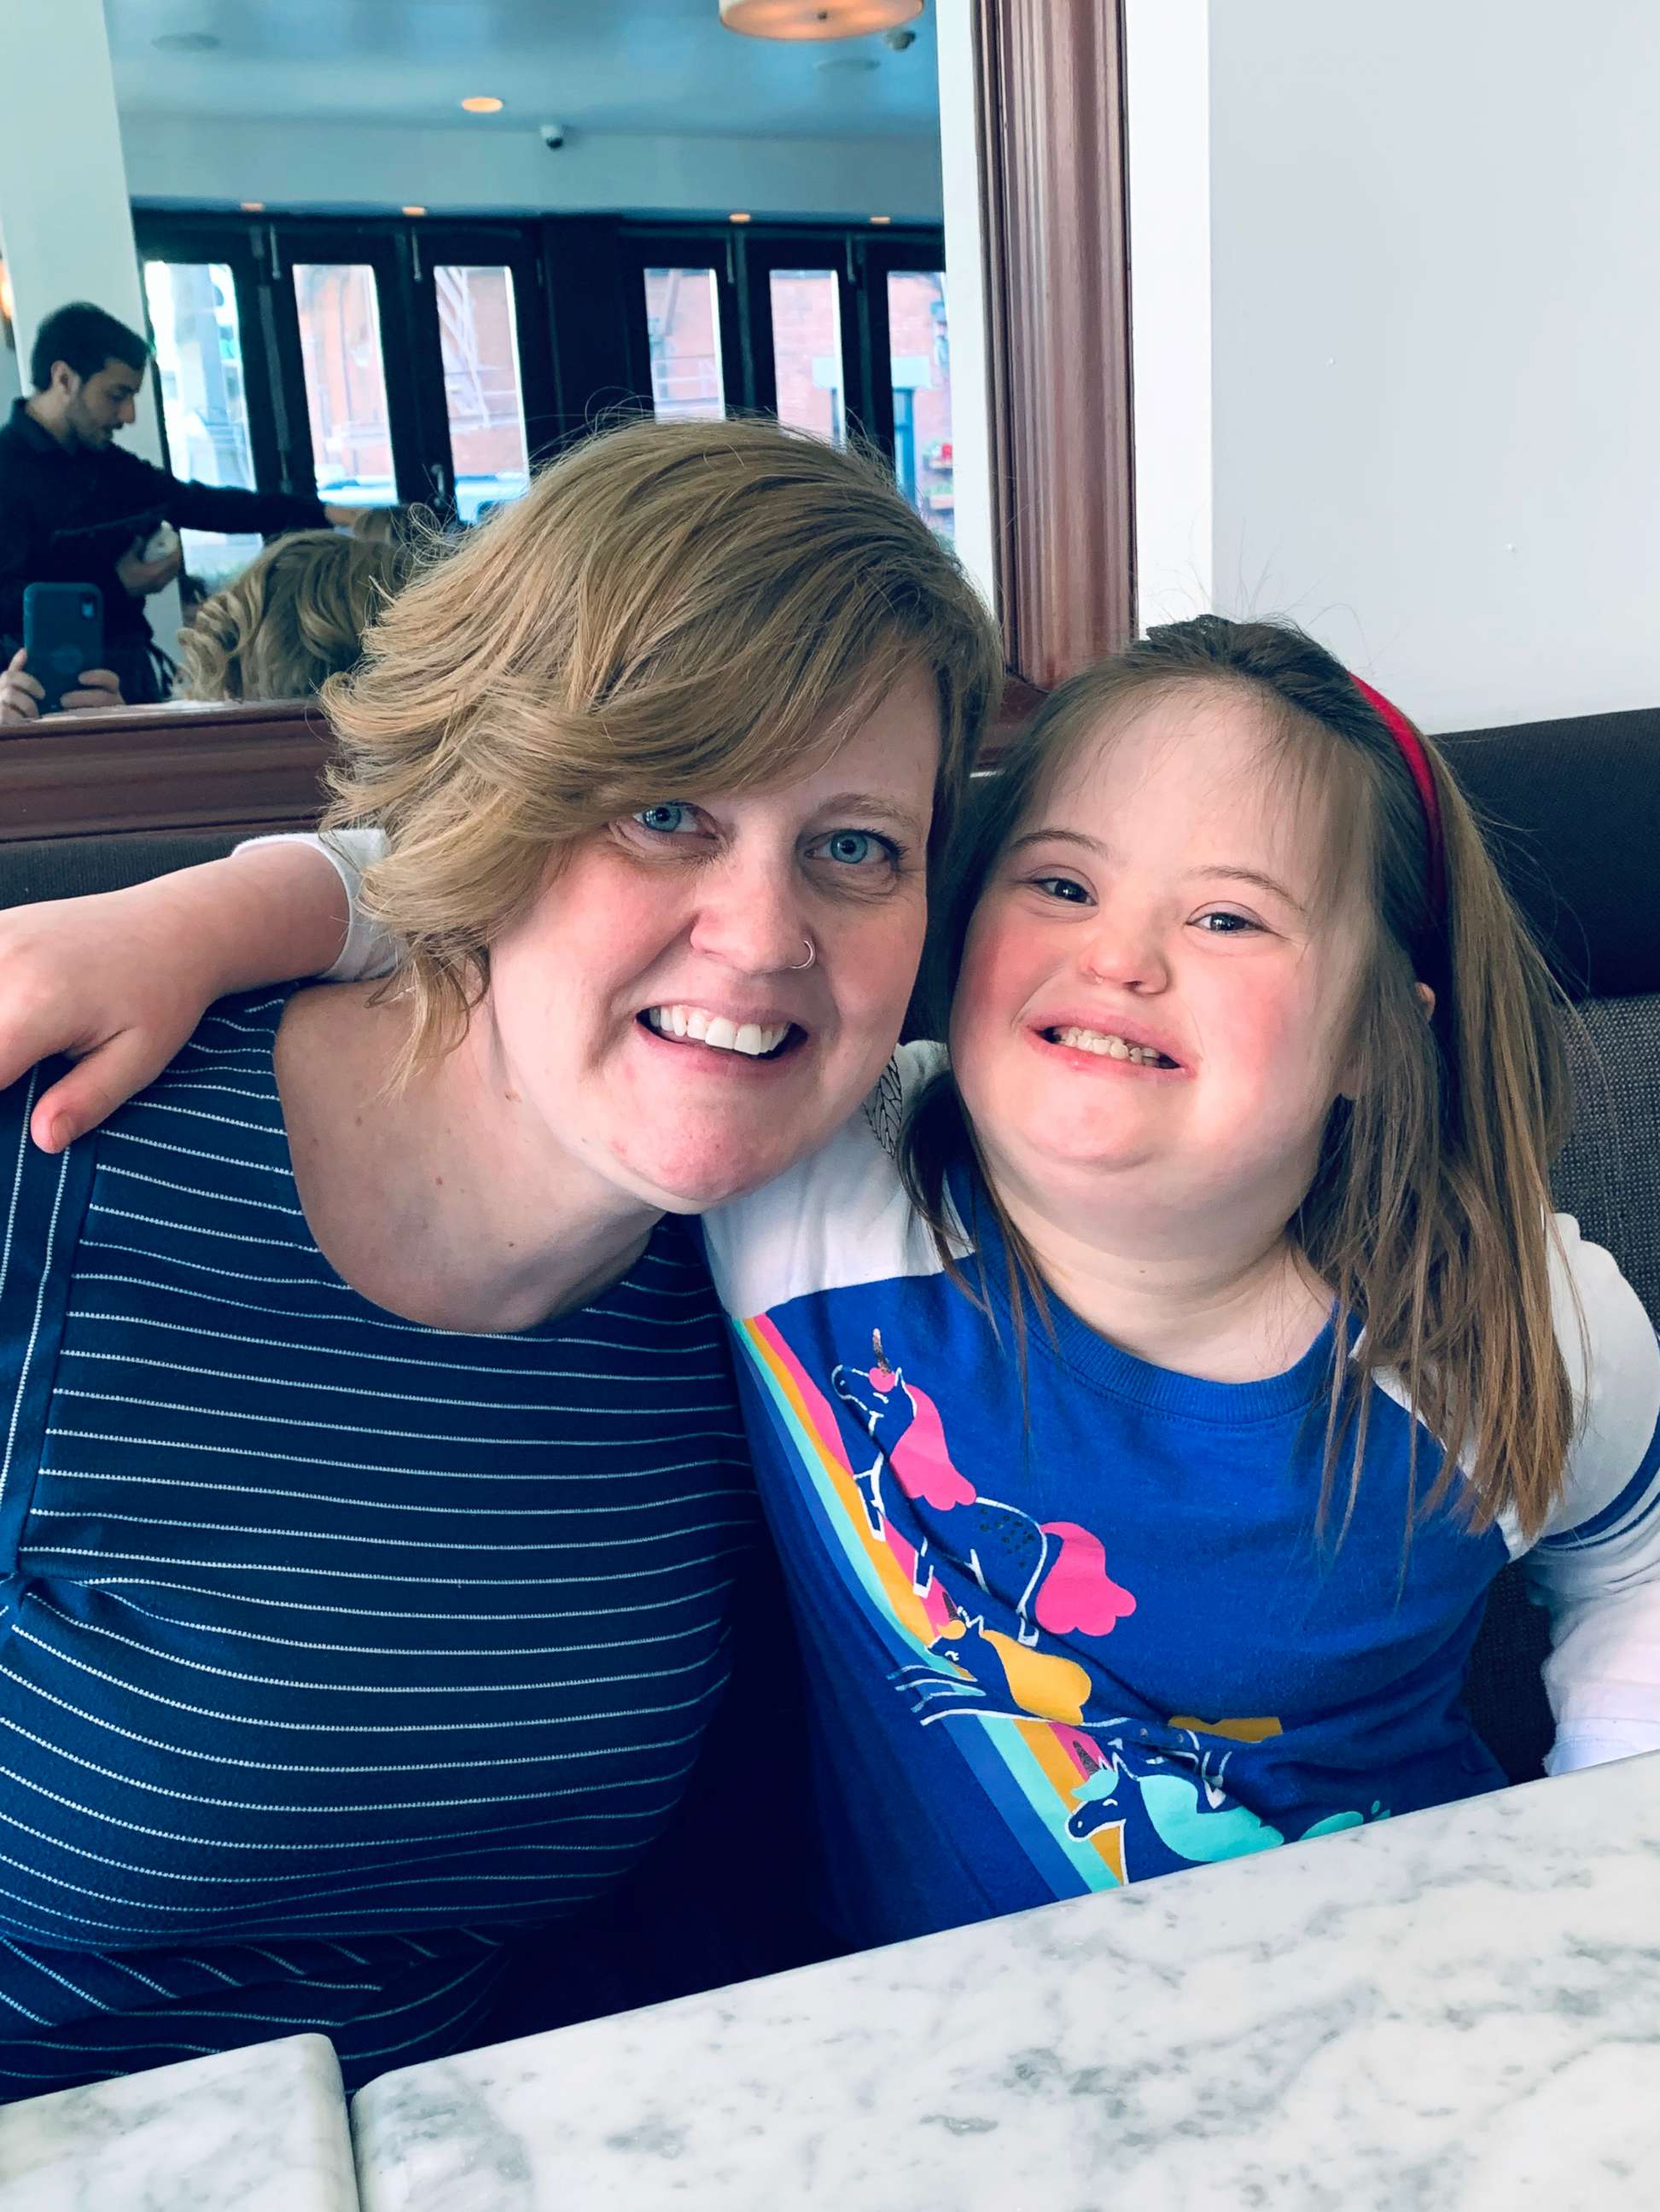 PHOTO: Melissa Winchell, a mother and university professor in West Bridgewater, Mass., has become a full-time caregiver for her daughter Moriah, 10, who has autism and down syndrome.